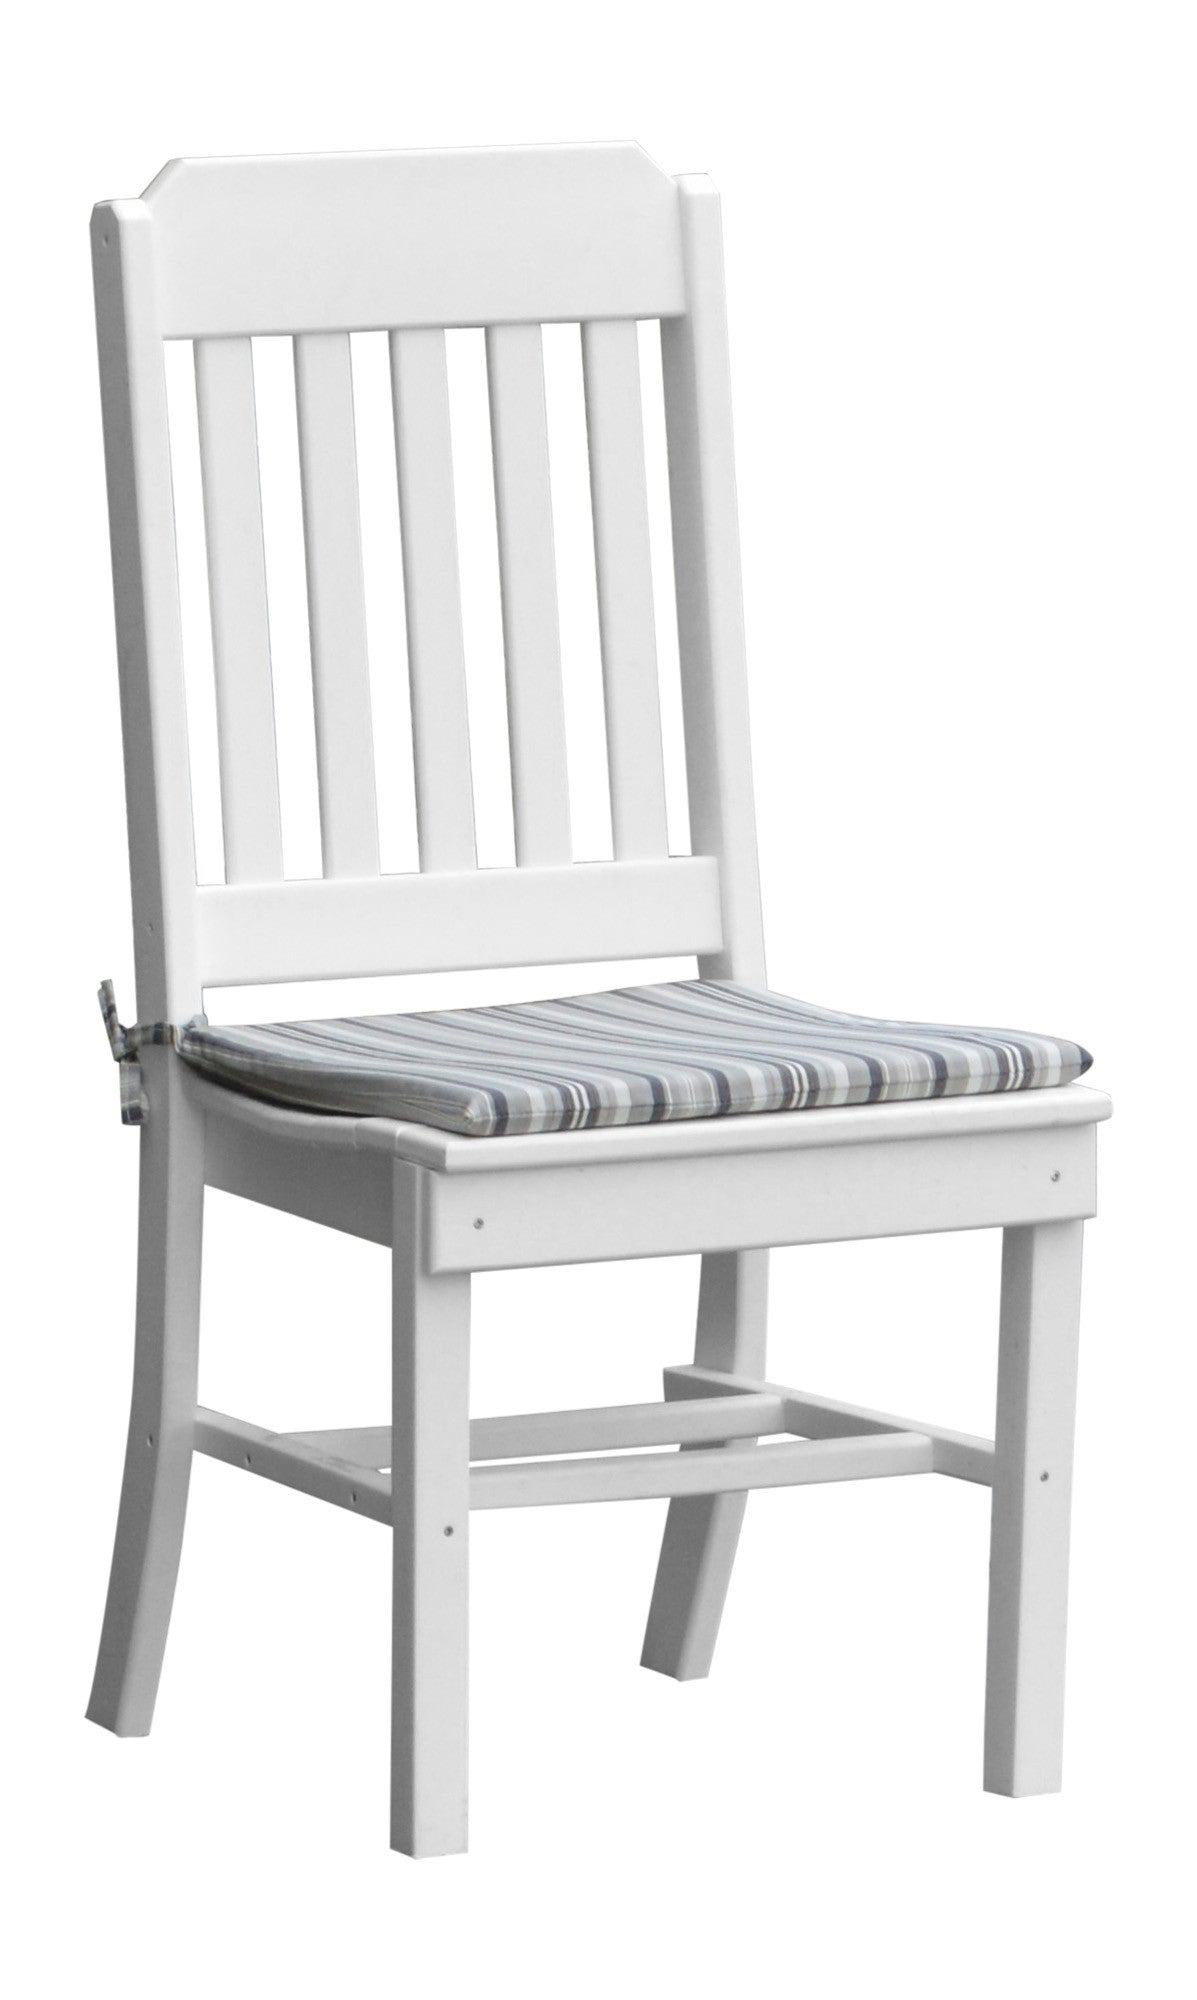 A&L Furniture Company Recycled Plastic Traditional Dining Chair - White